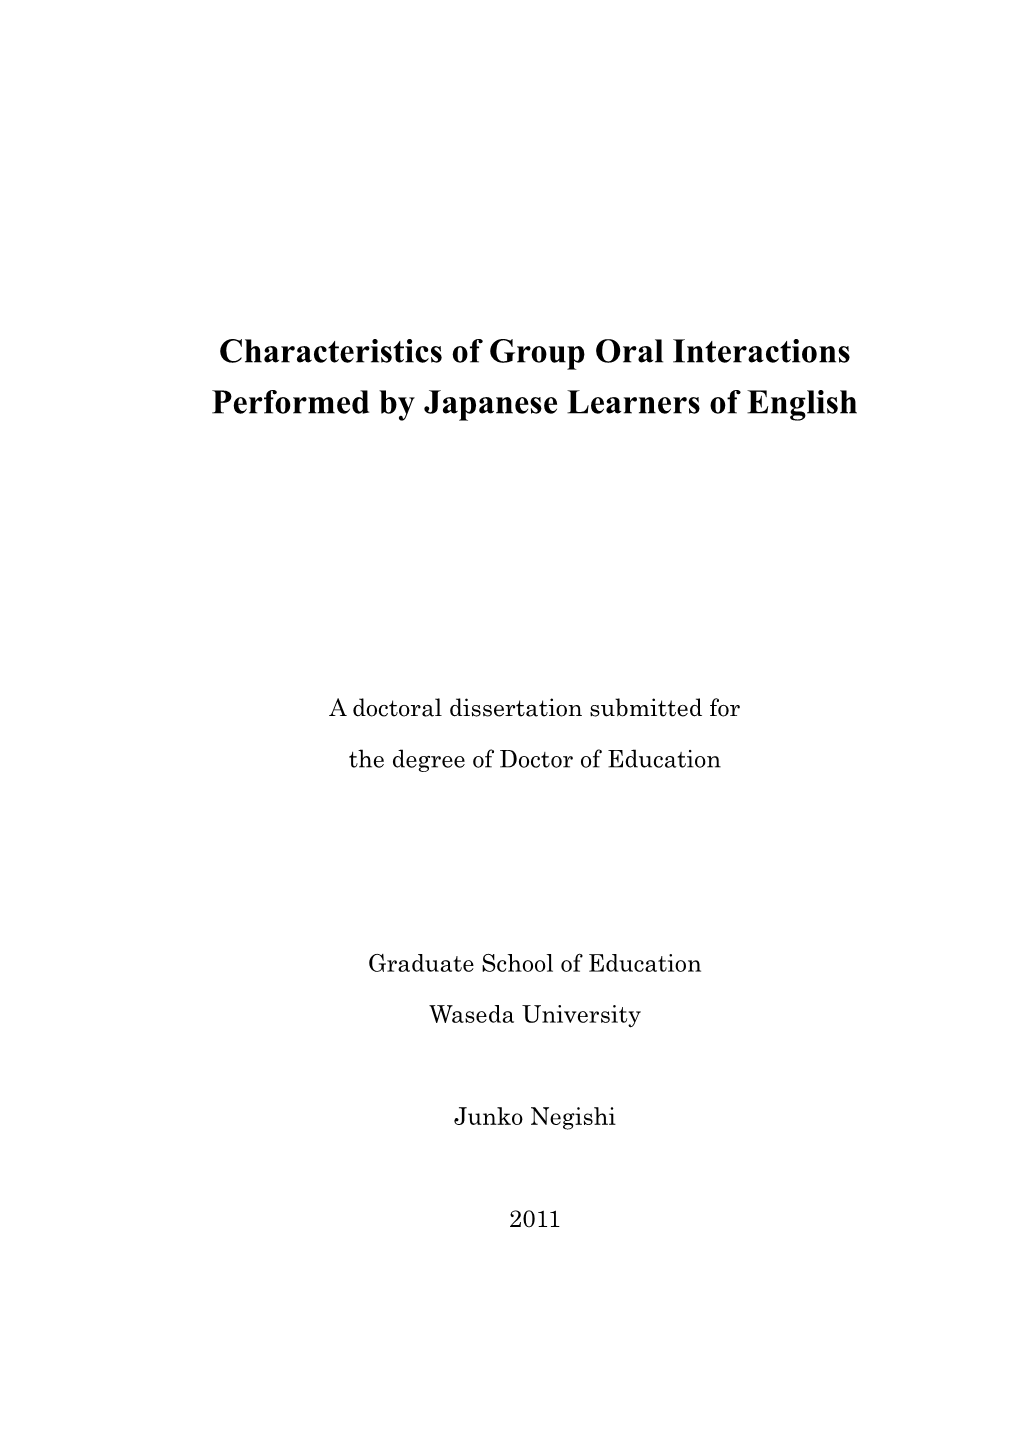 Characteristics of Group Oral Interactions Performed by Japanese Learners of English